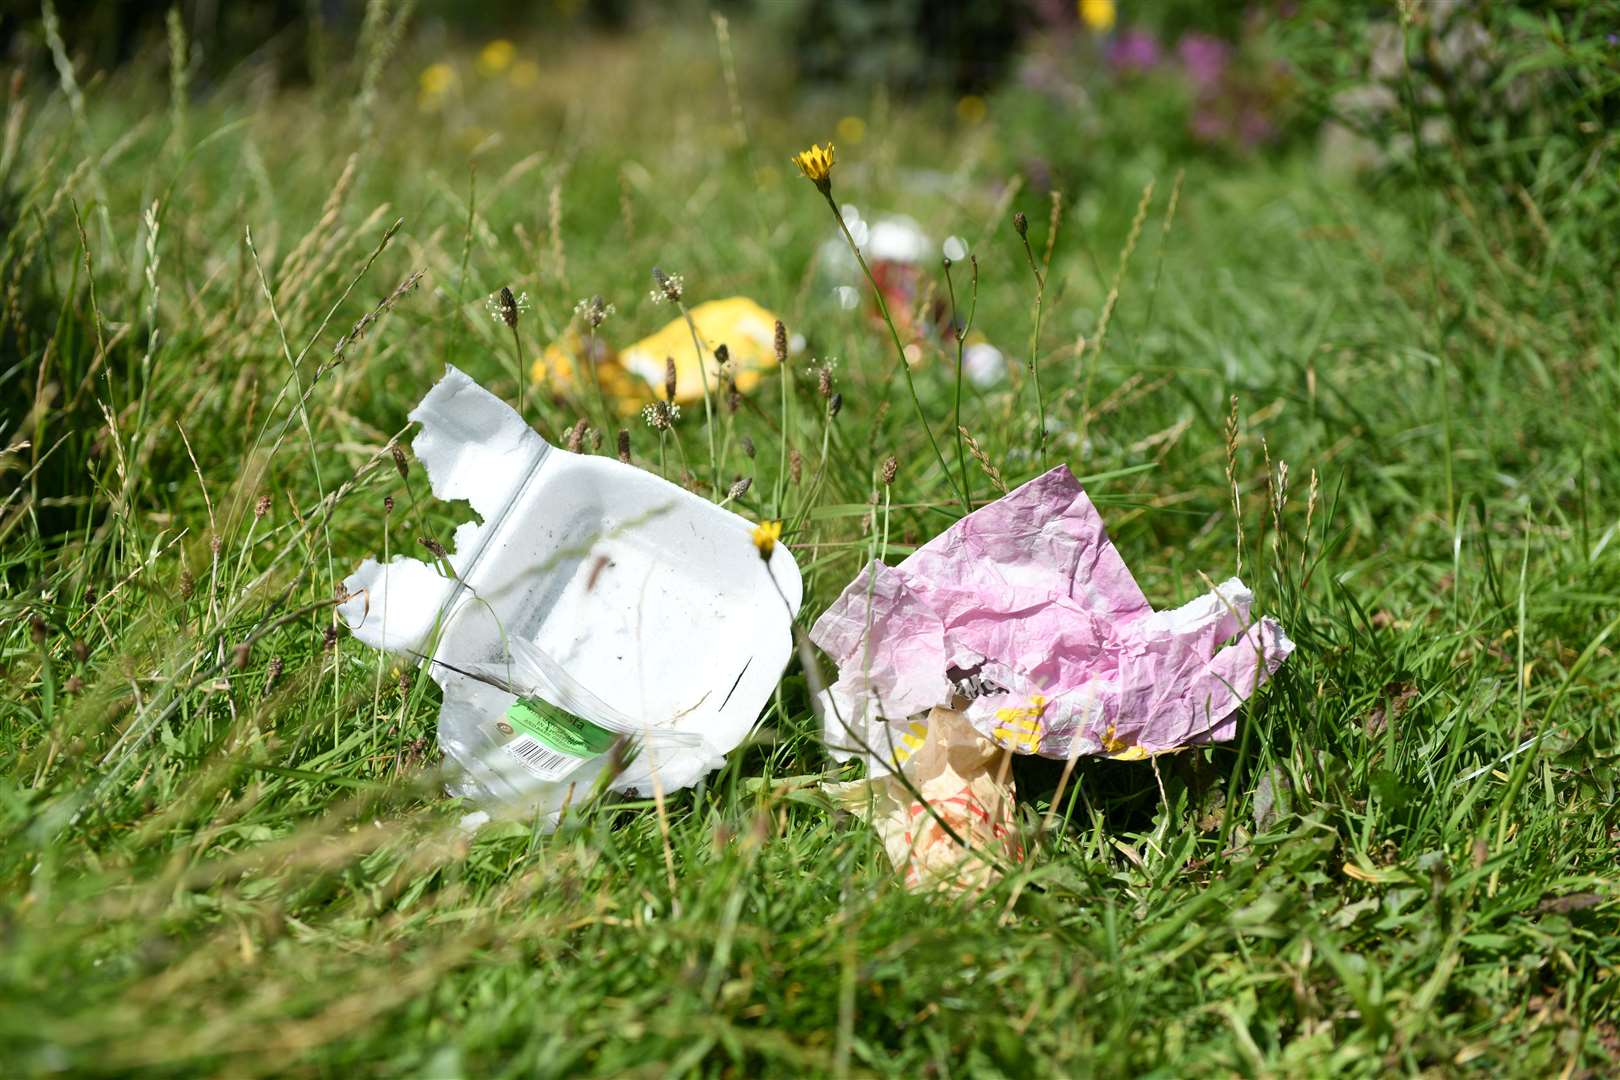 Litter has attracted hundreds of complaints.